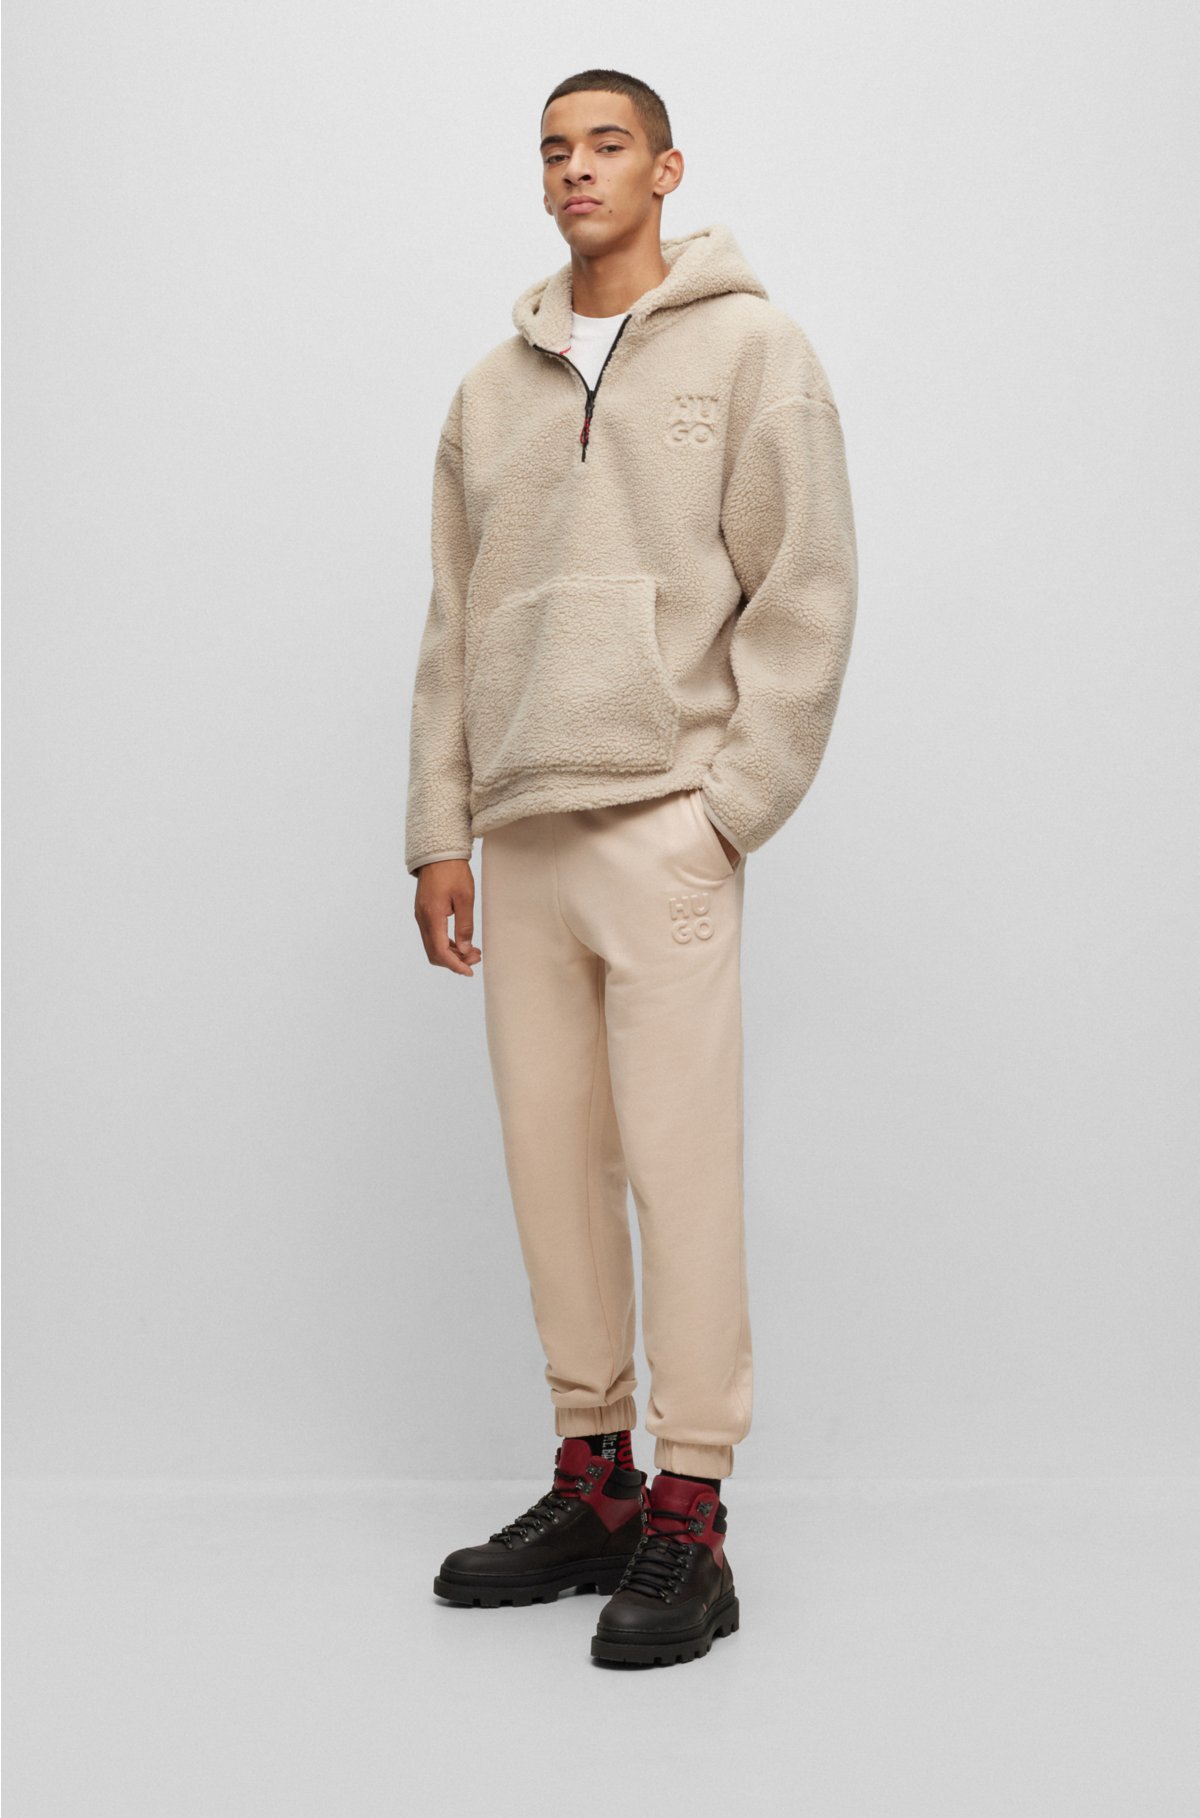 Sweat Half Zip Polaire Toasted - Sweats Homme